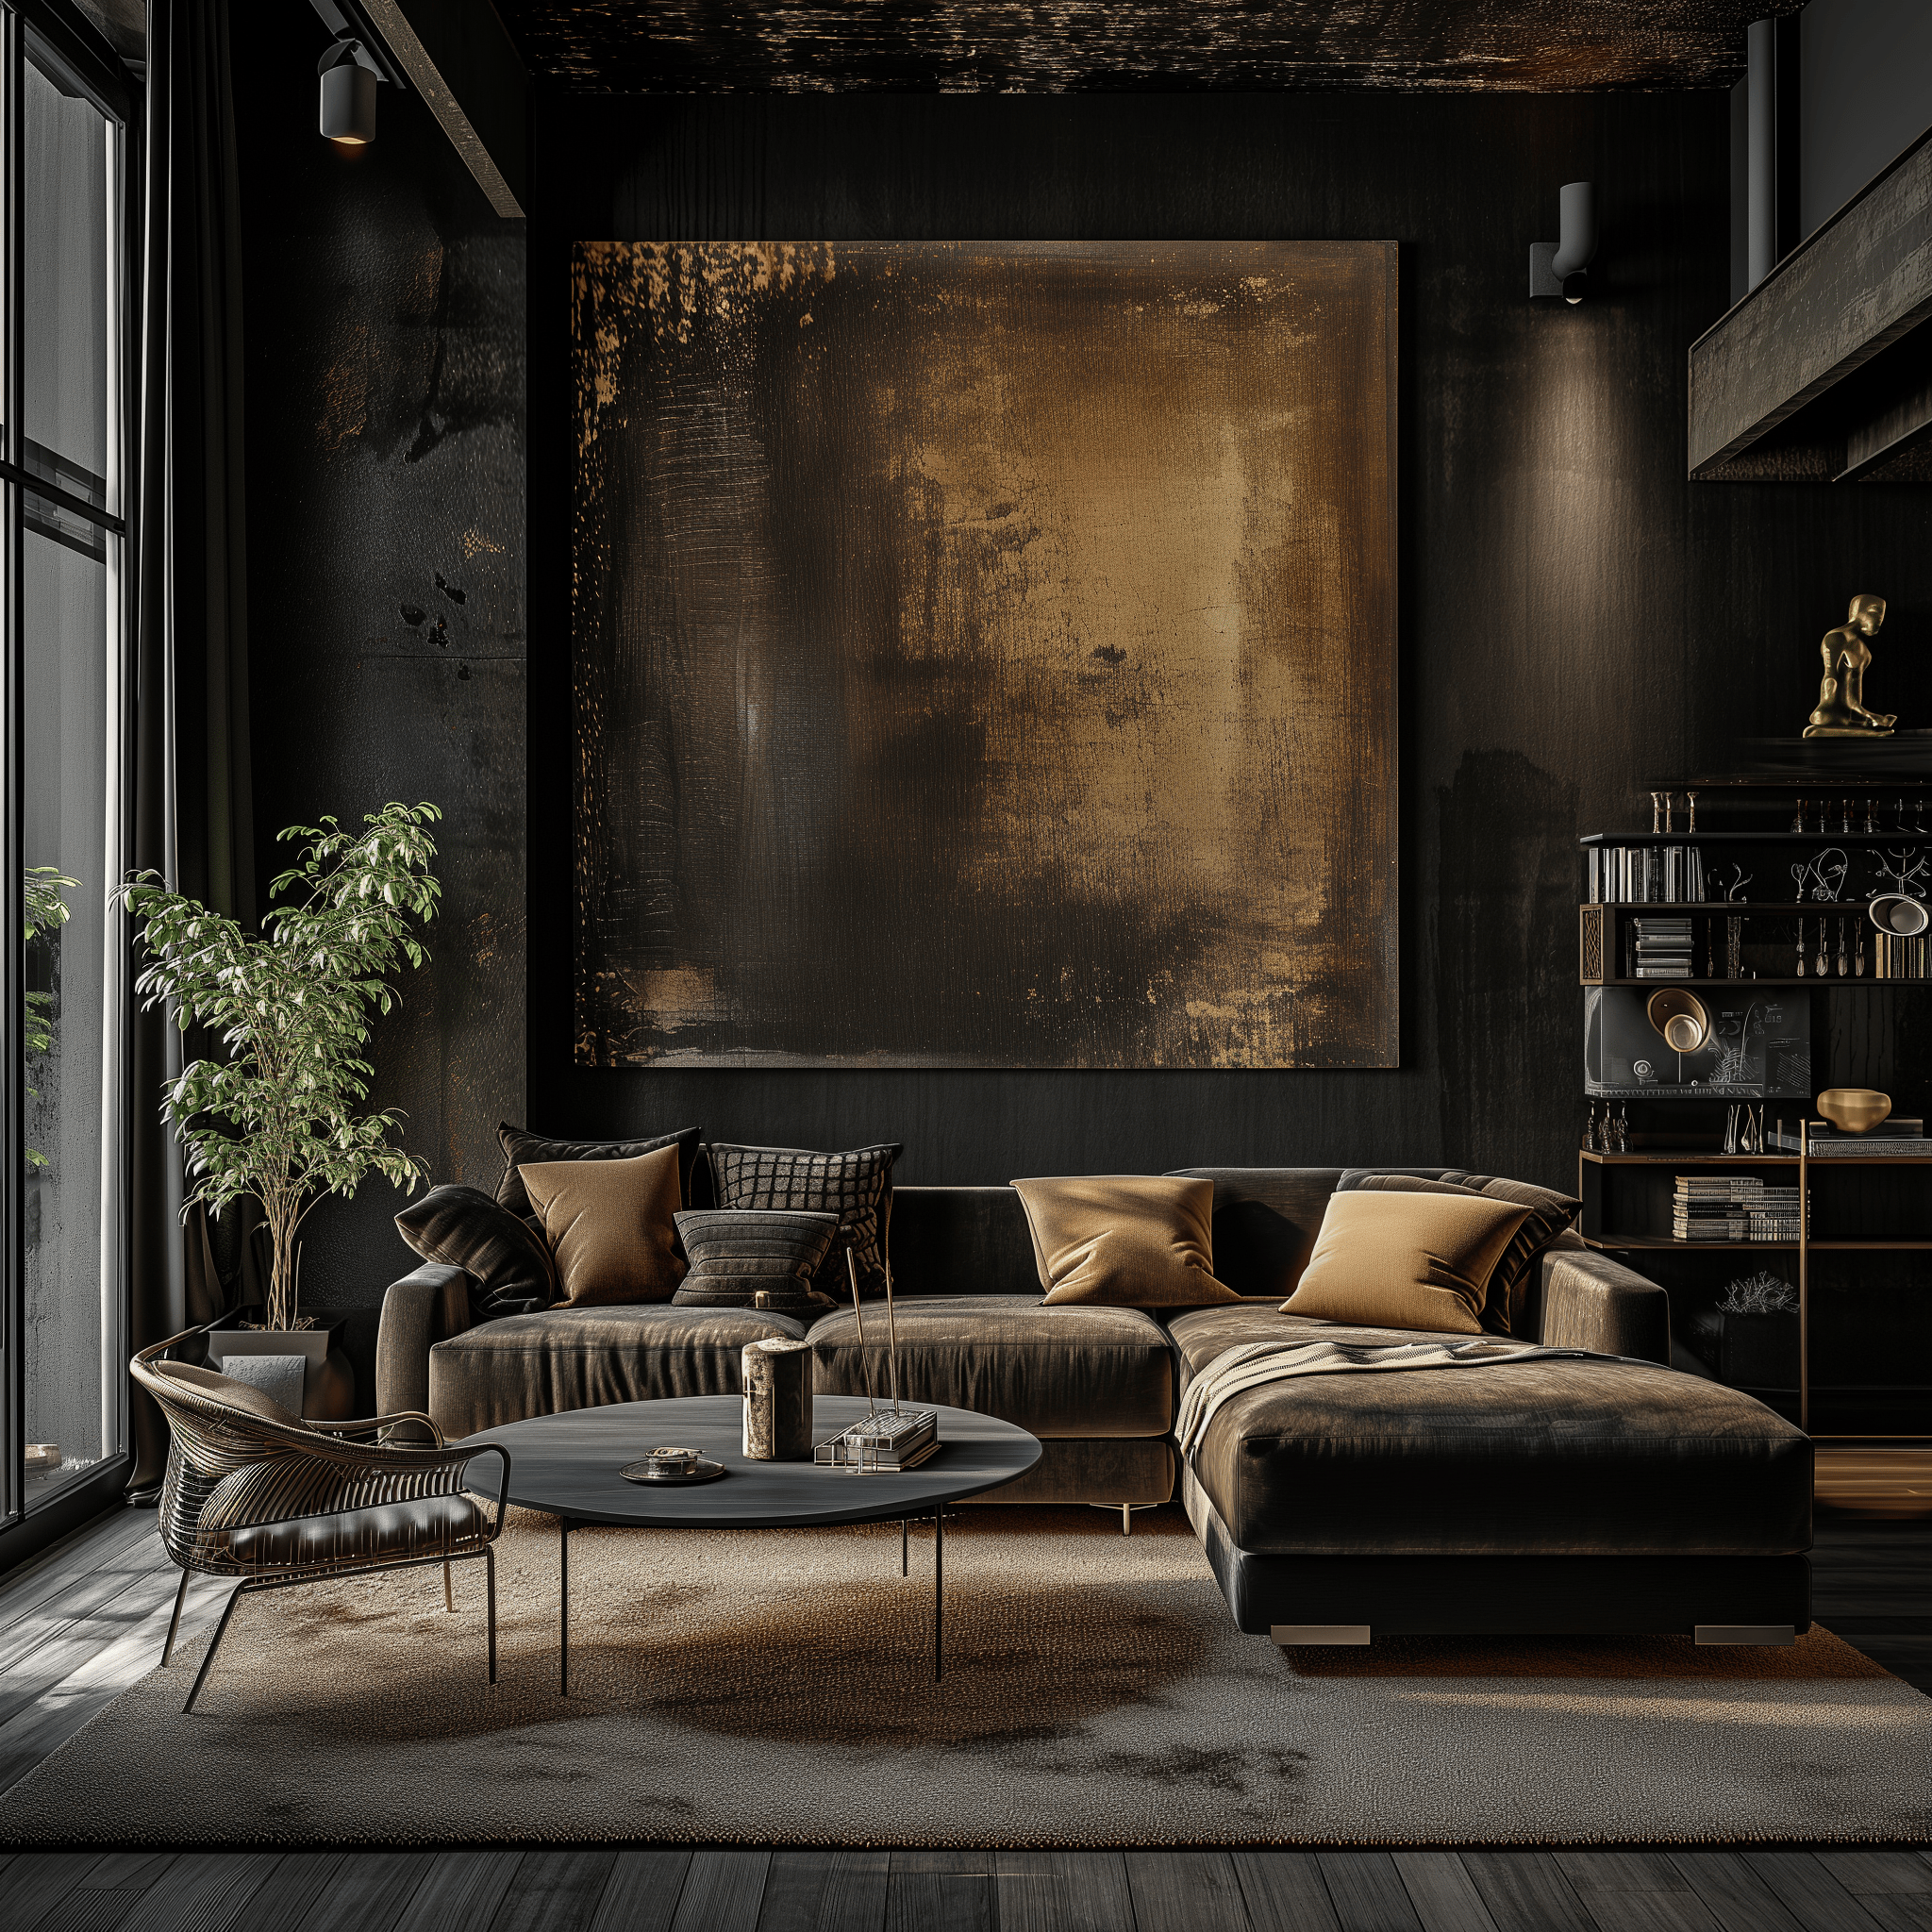 Eye-level photograph of a spacious, dark living room, showcasing the interplay of luxury textiles and textured walls in daylight.